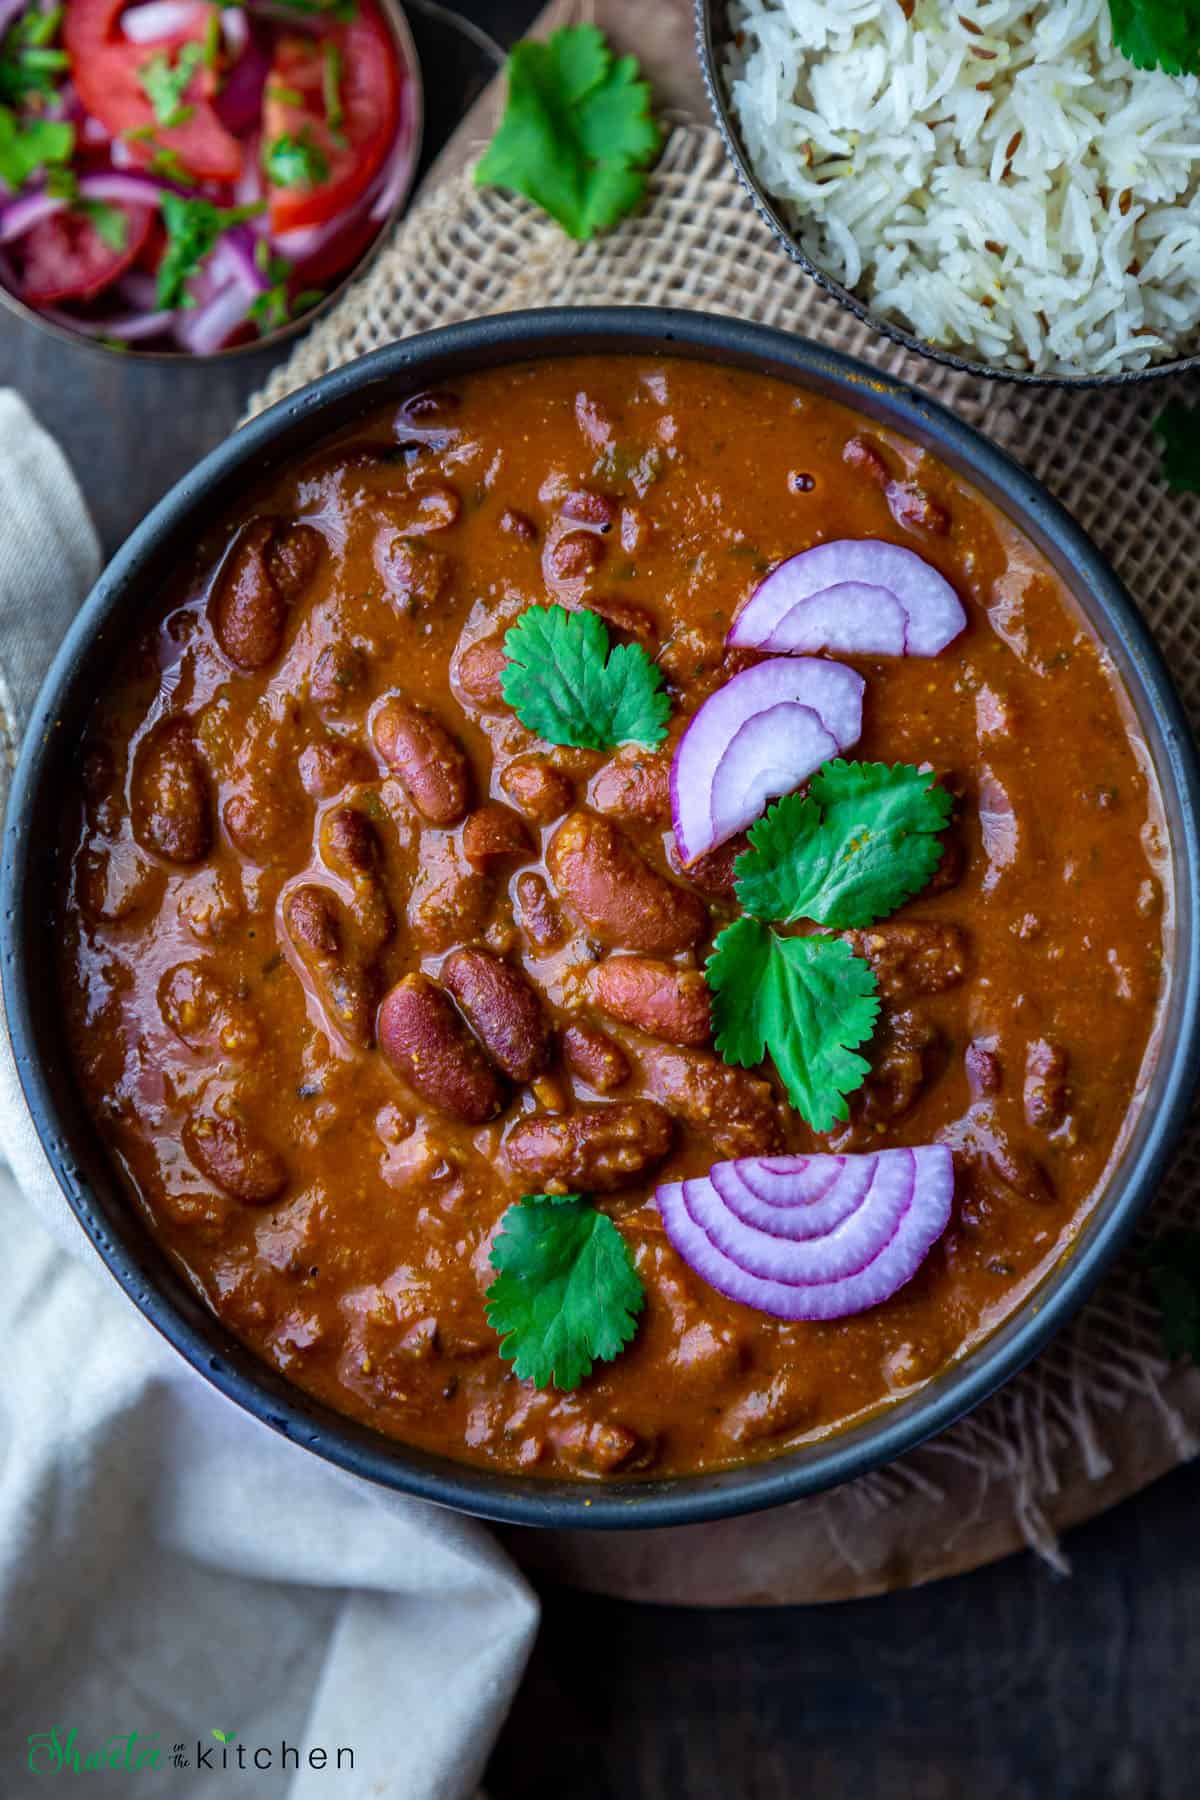 Bowl of Rajma garnished with cilantro and onions